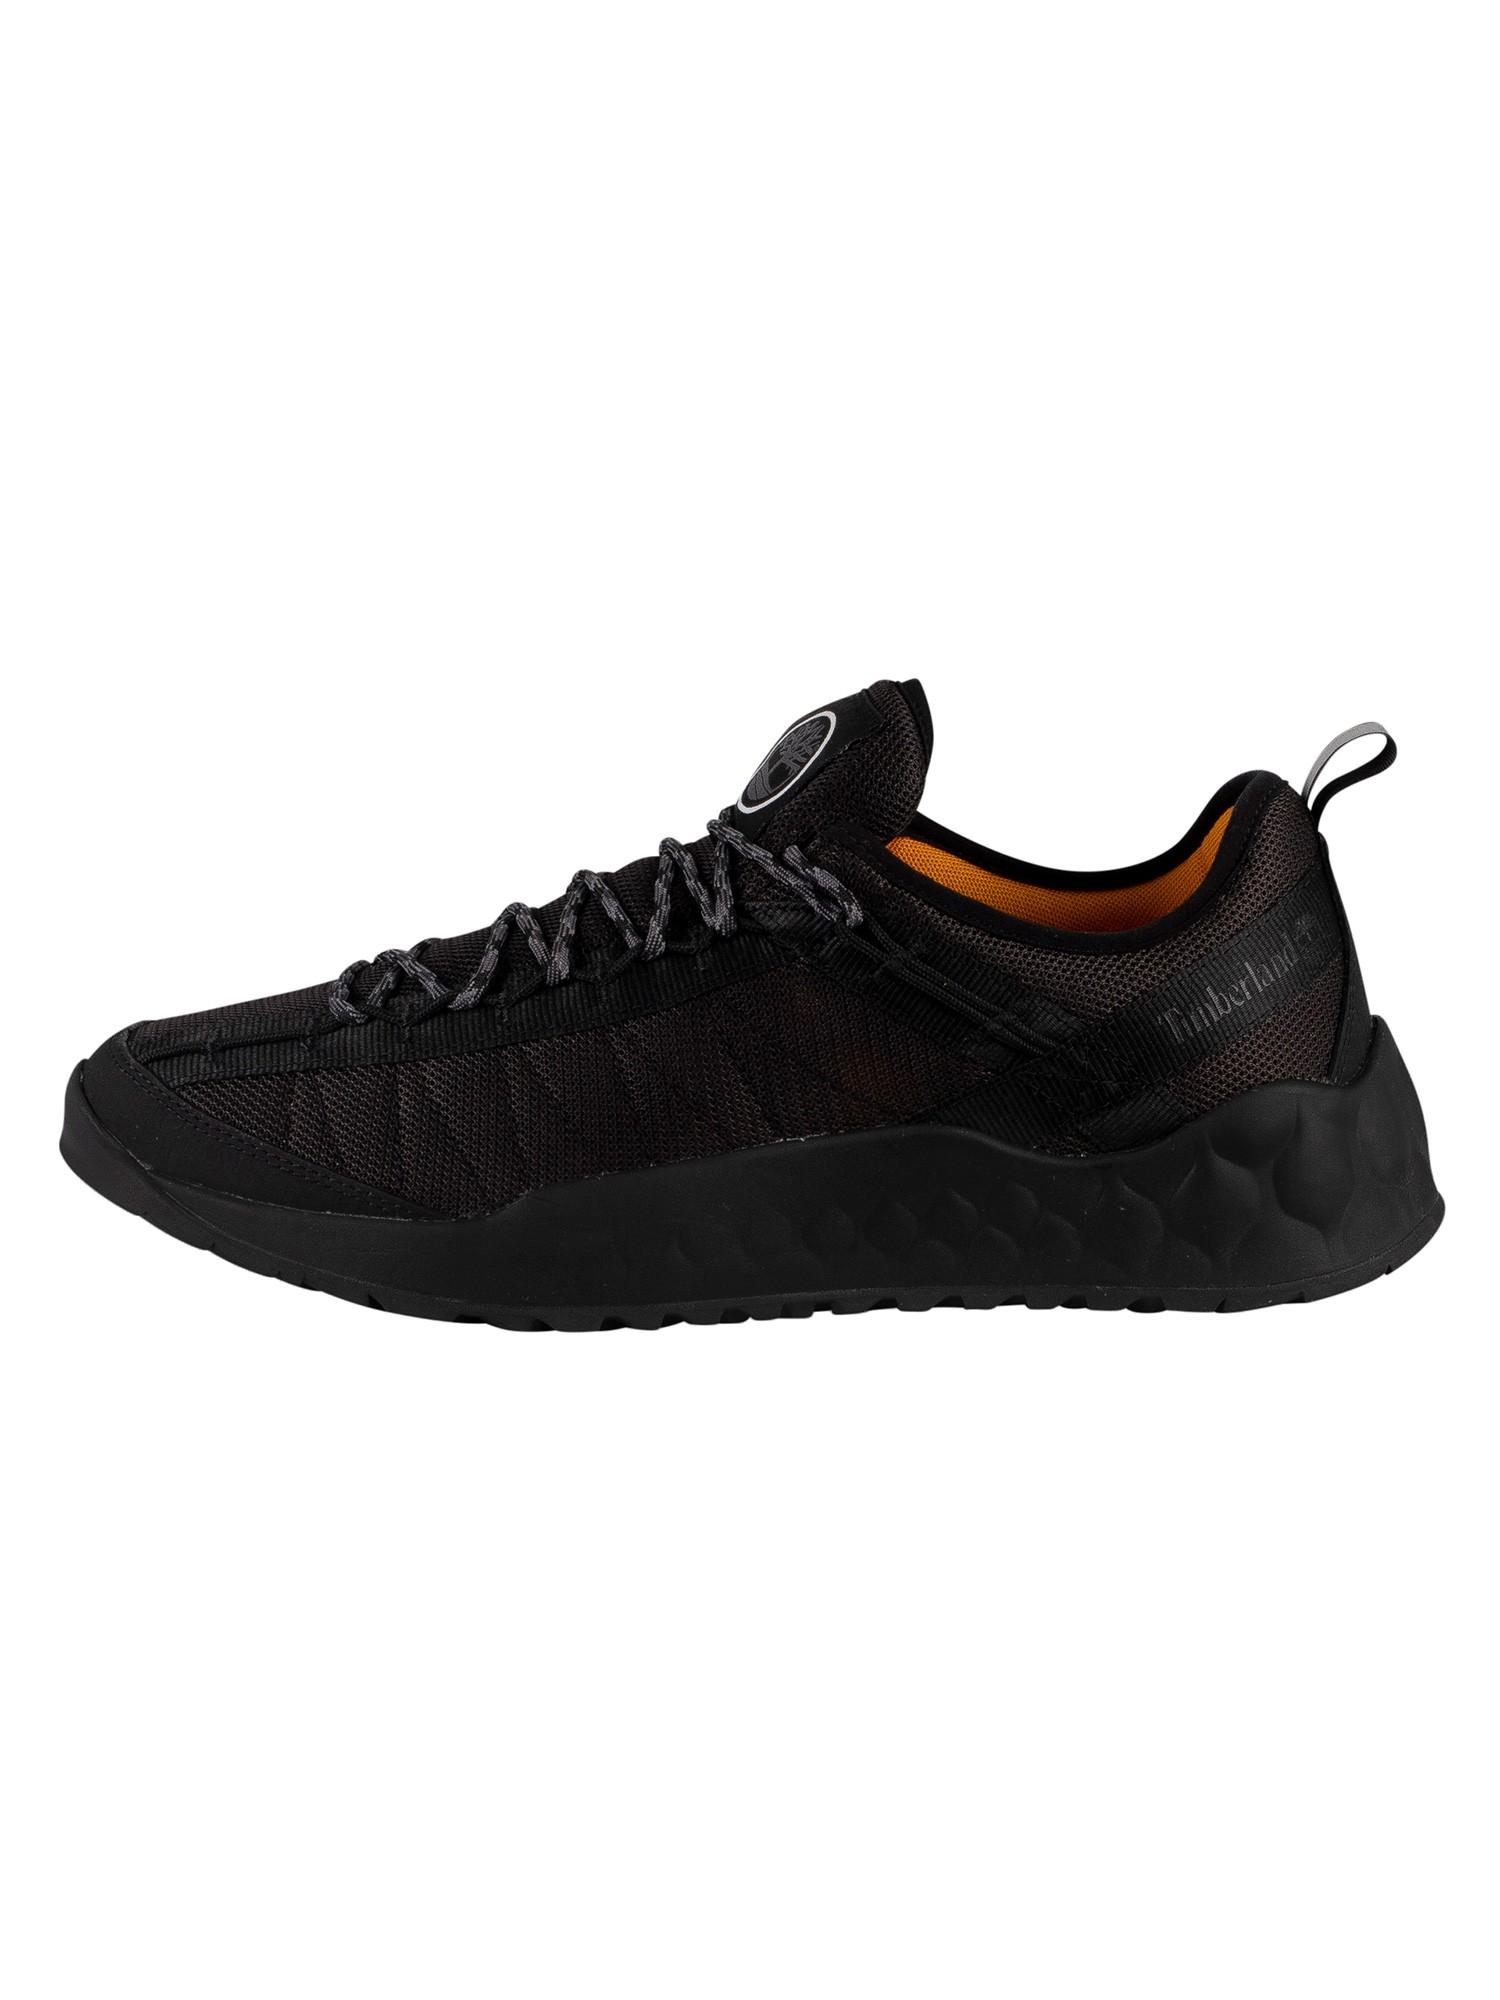 Timberland Leather Solar Wave Low Mesh Trainers in Black for Men - Lyst